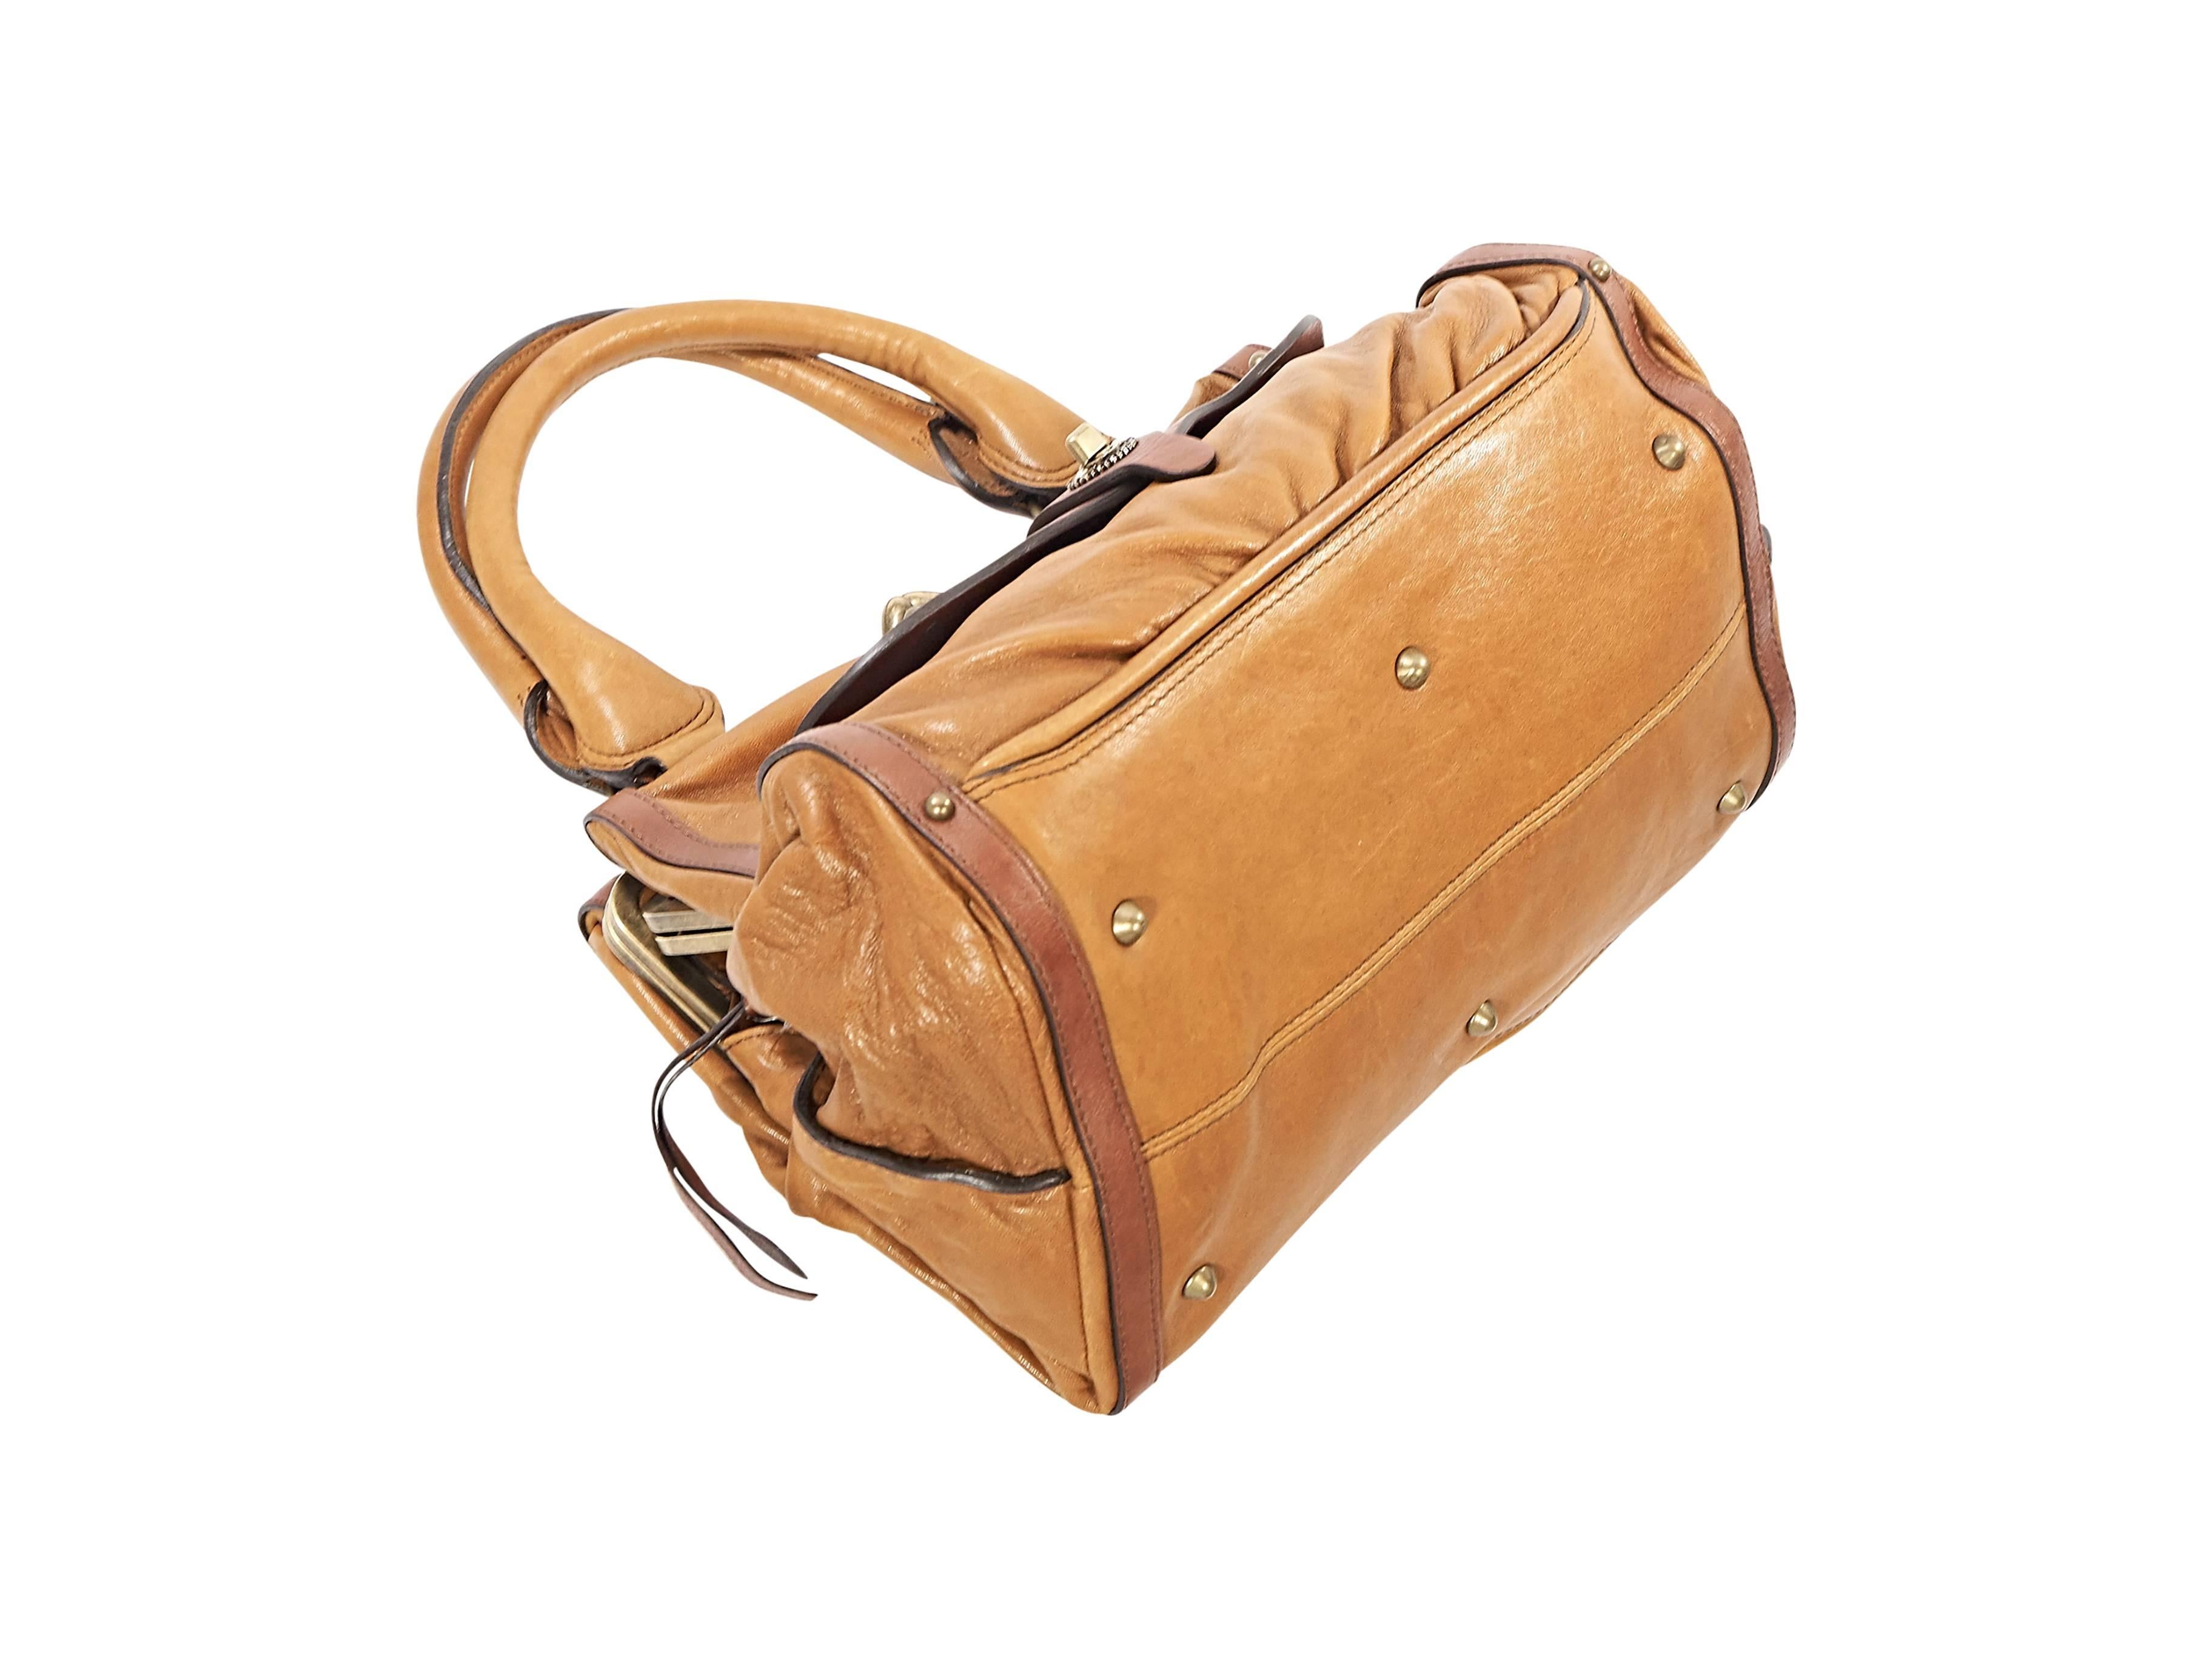 Product details:  Tan two-toned leather handbag by Chloe.  Dual carry handles.  Front twist-lock flap pocket.  Three main compartments.  Top zip, kiss-lock and push closures.  Lined interior with inner zip pockets.  Protective metal feet.  Antiqued